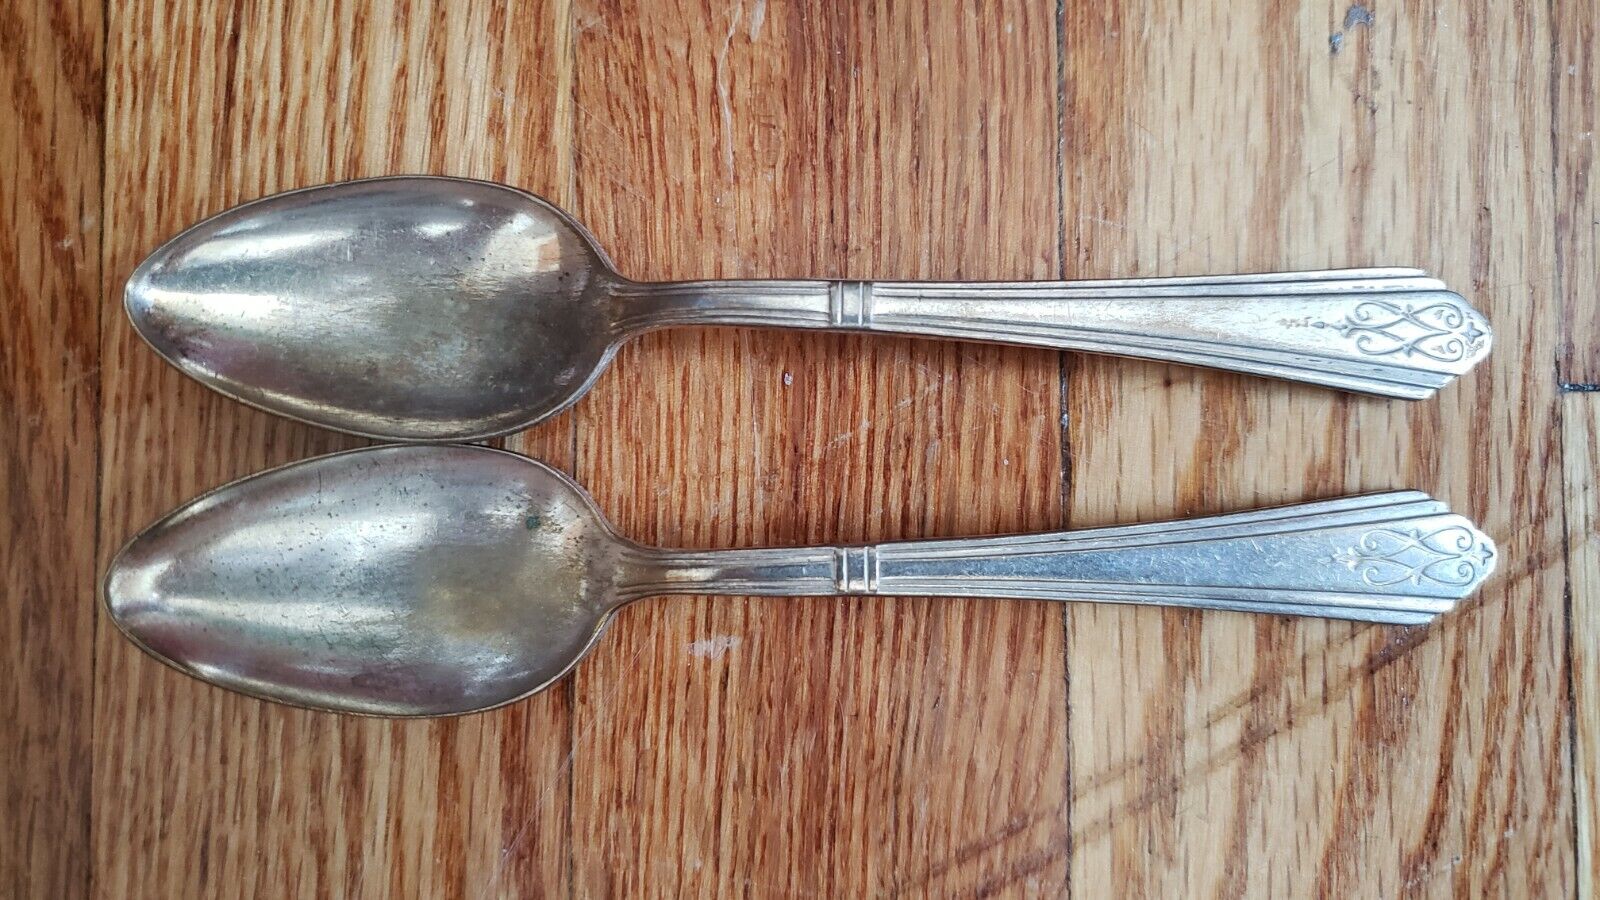 2 ANTIQUE COLLECTIBLE TEA SPOONS 6" WINTHROP SILVER PLATE - 